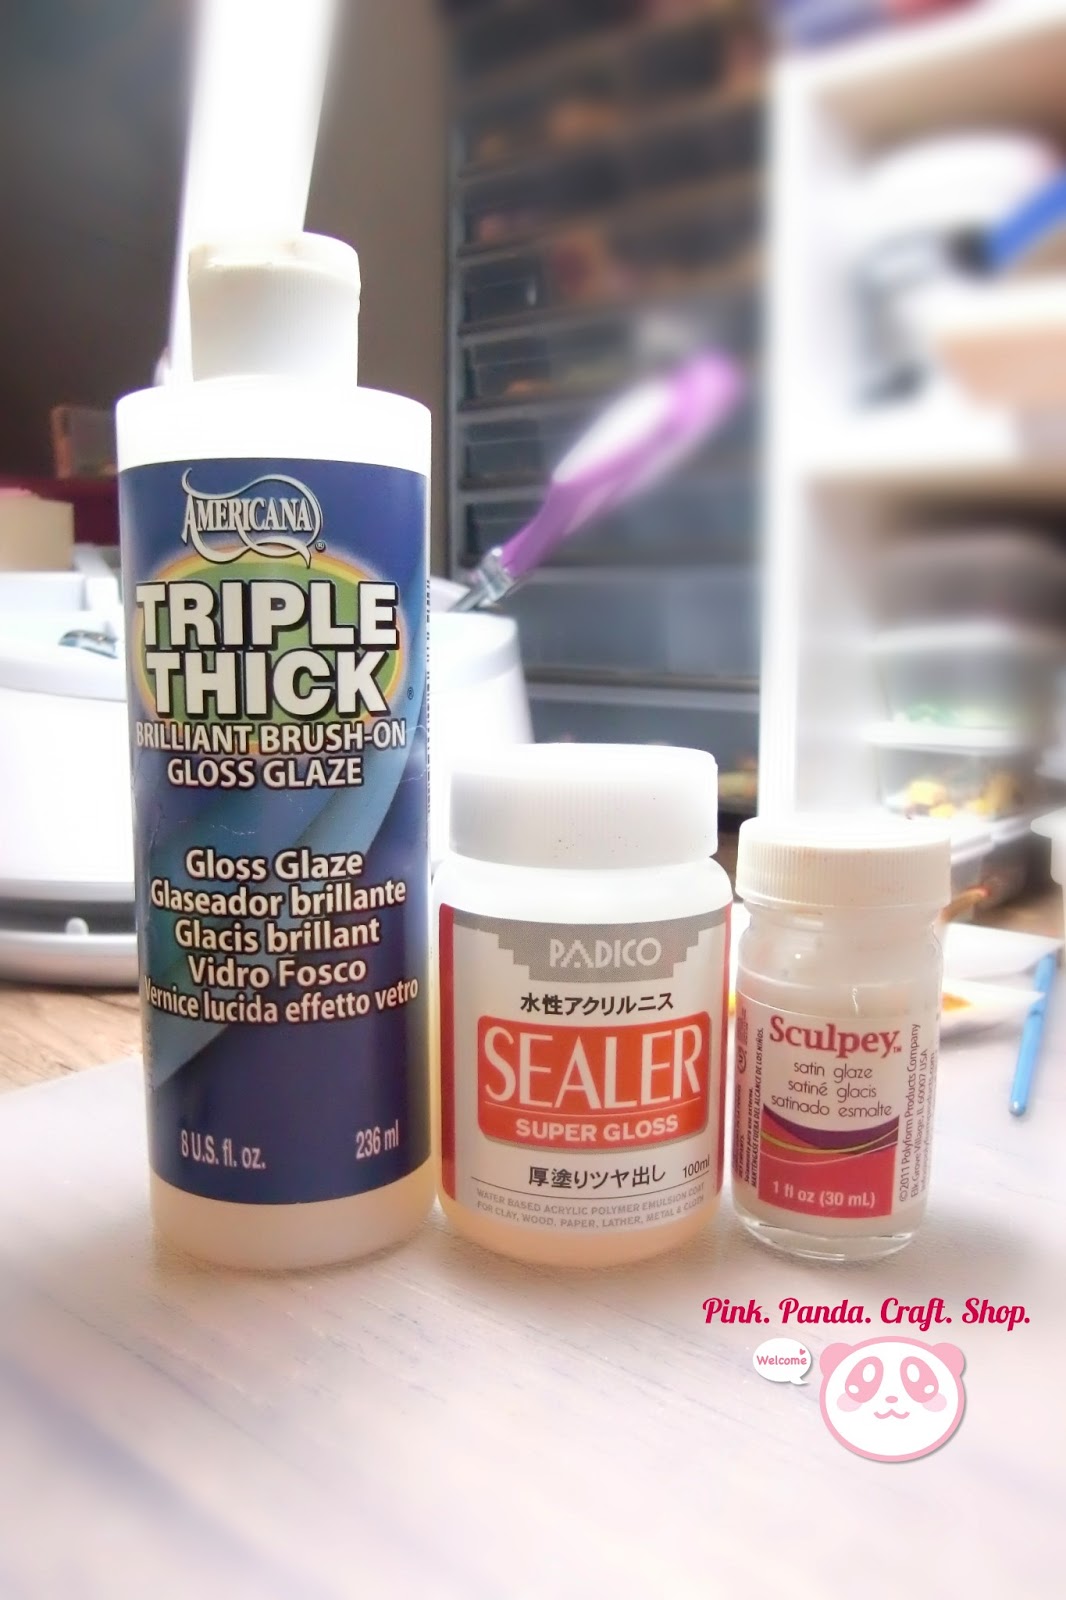 Comparing Triple Thick with Decopatch Ultra Gloss - A quick